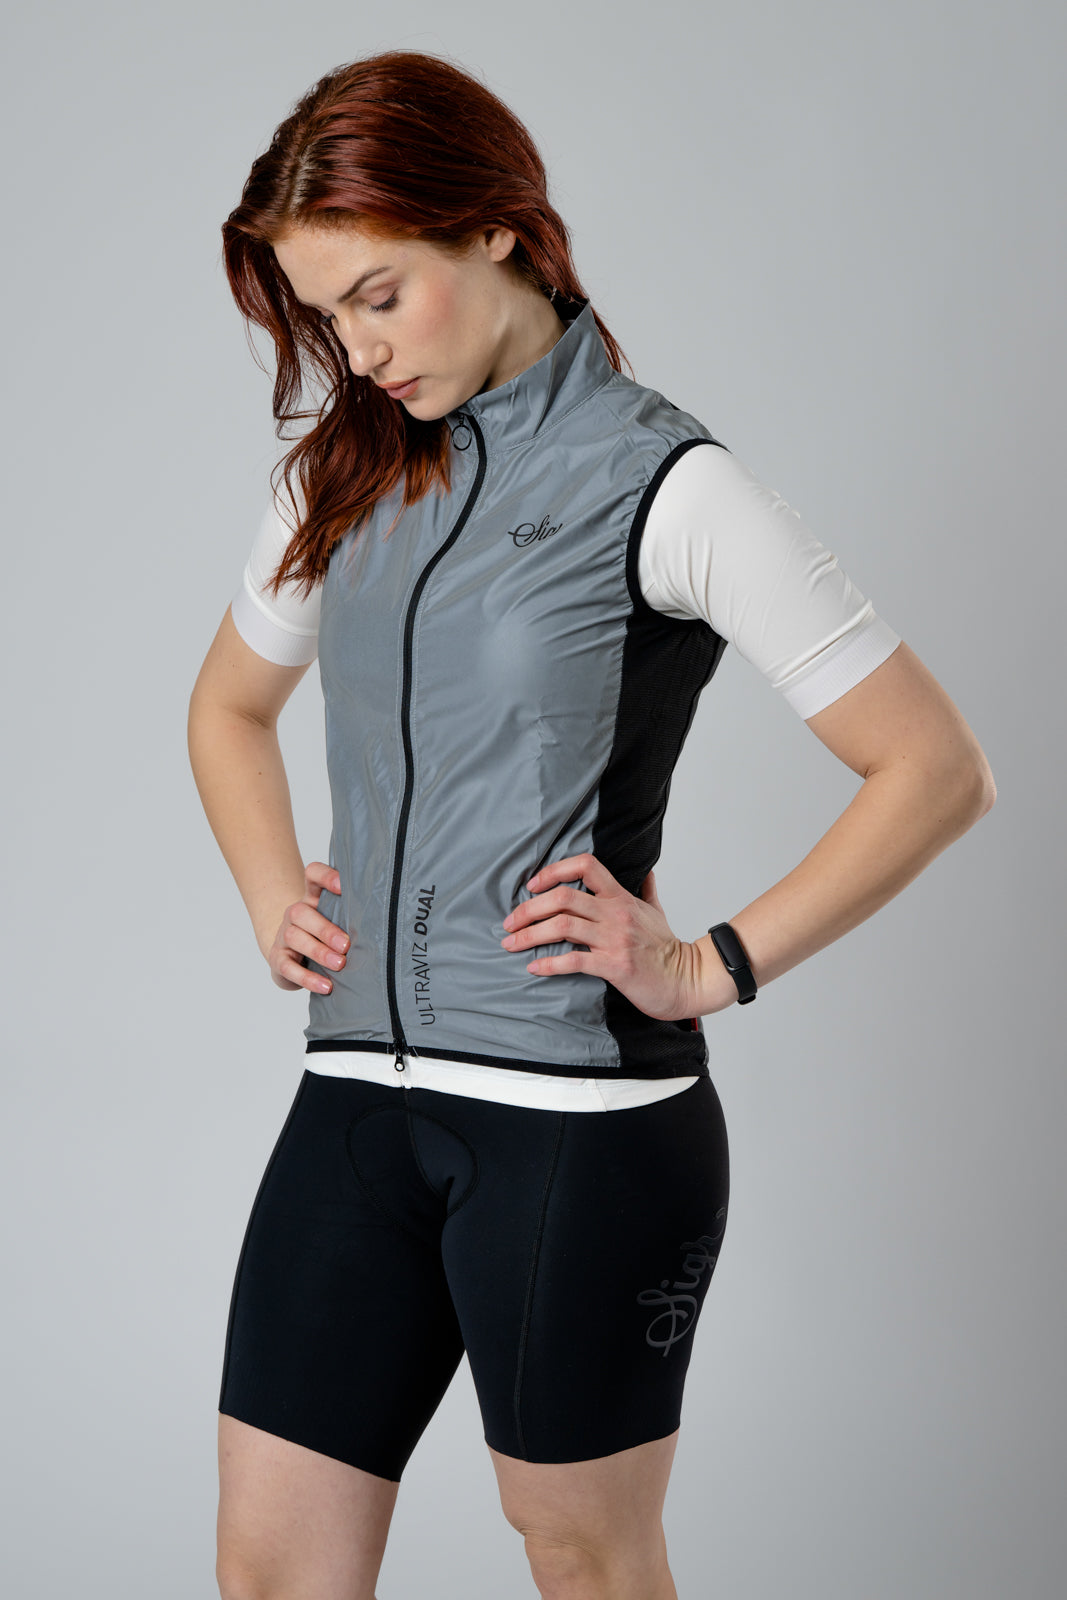 Norrsken - Silver Reflective Road Cycling Gilet for Women - PRO Series